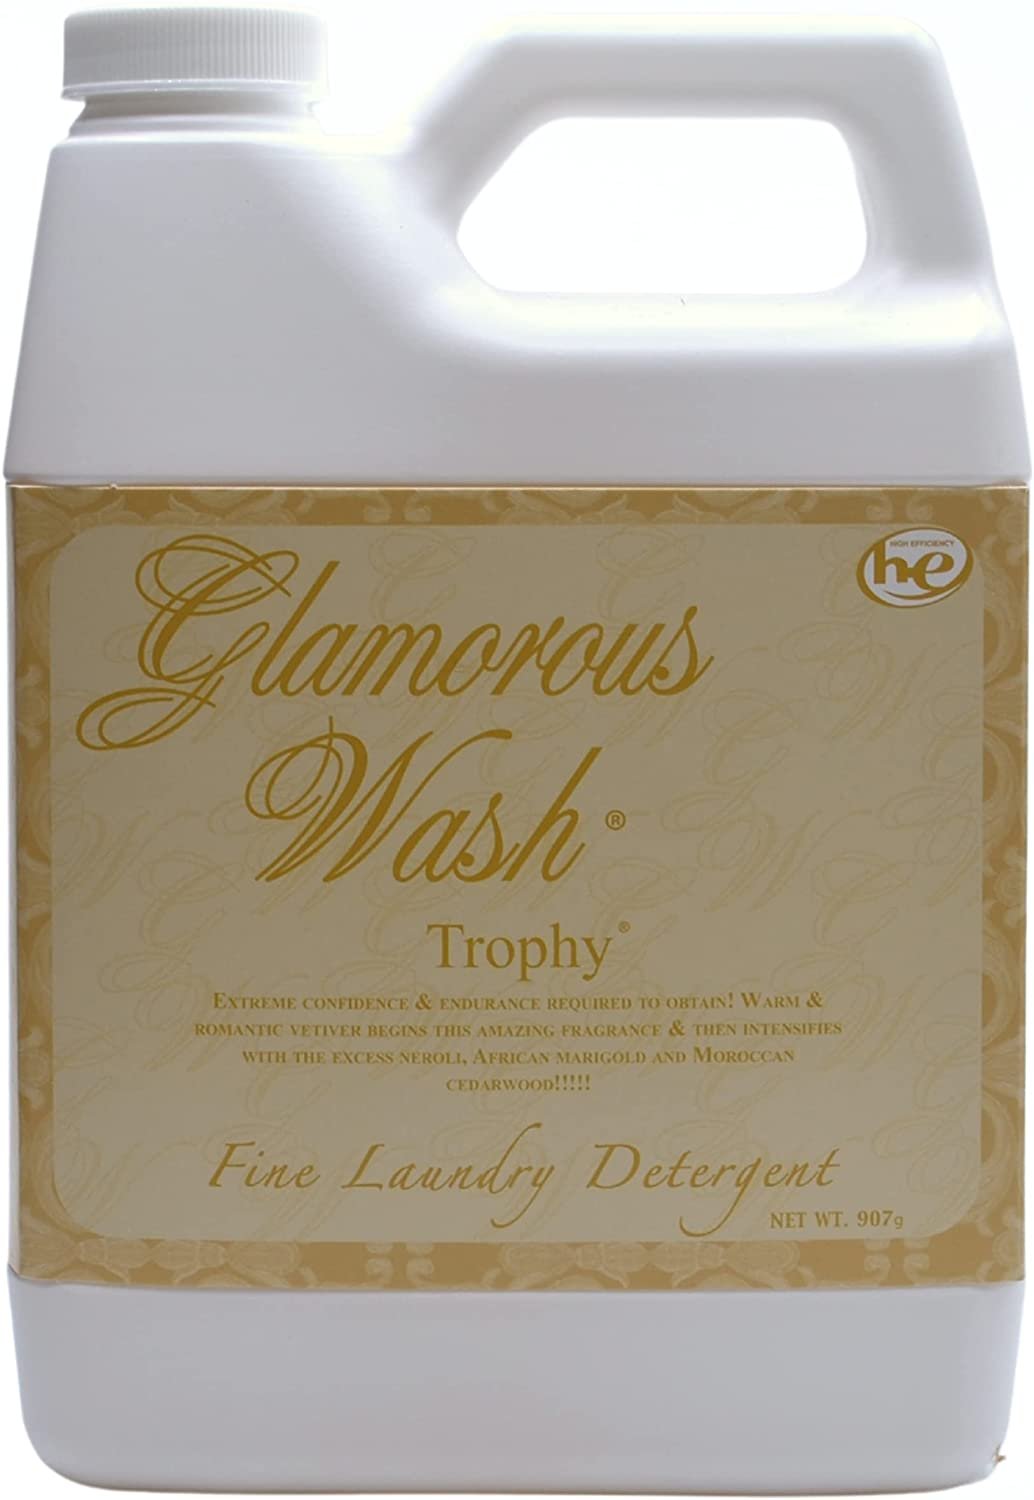 Tyler Candle Company Glamorous Wash Trophy Fine Laundry Detergent - Liquid Laundry Detergent for Clothing - Hand and Machine Washable - 907 Gram Container